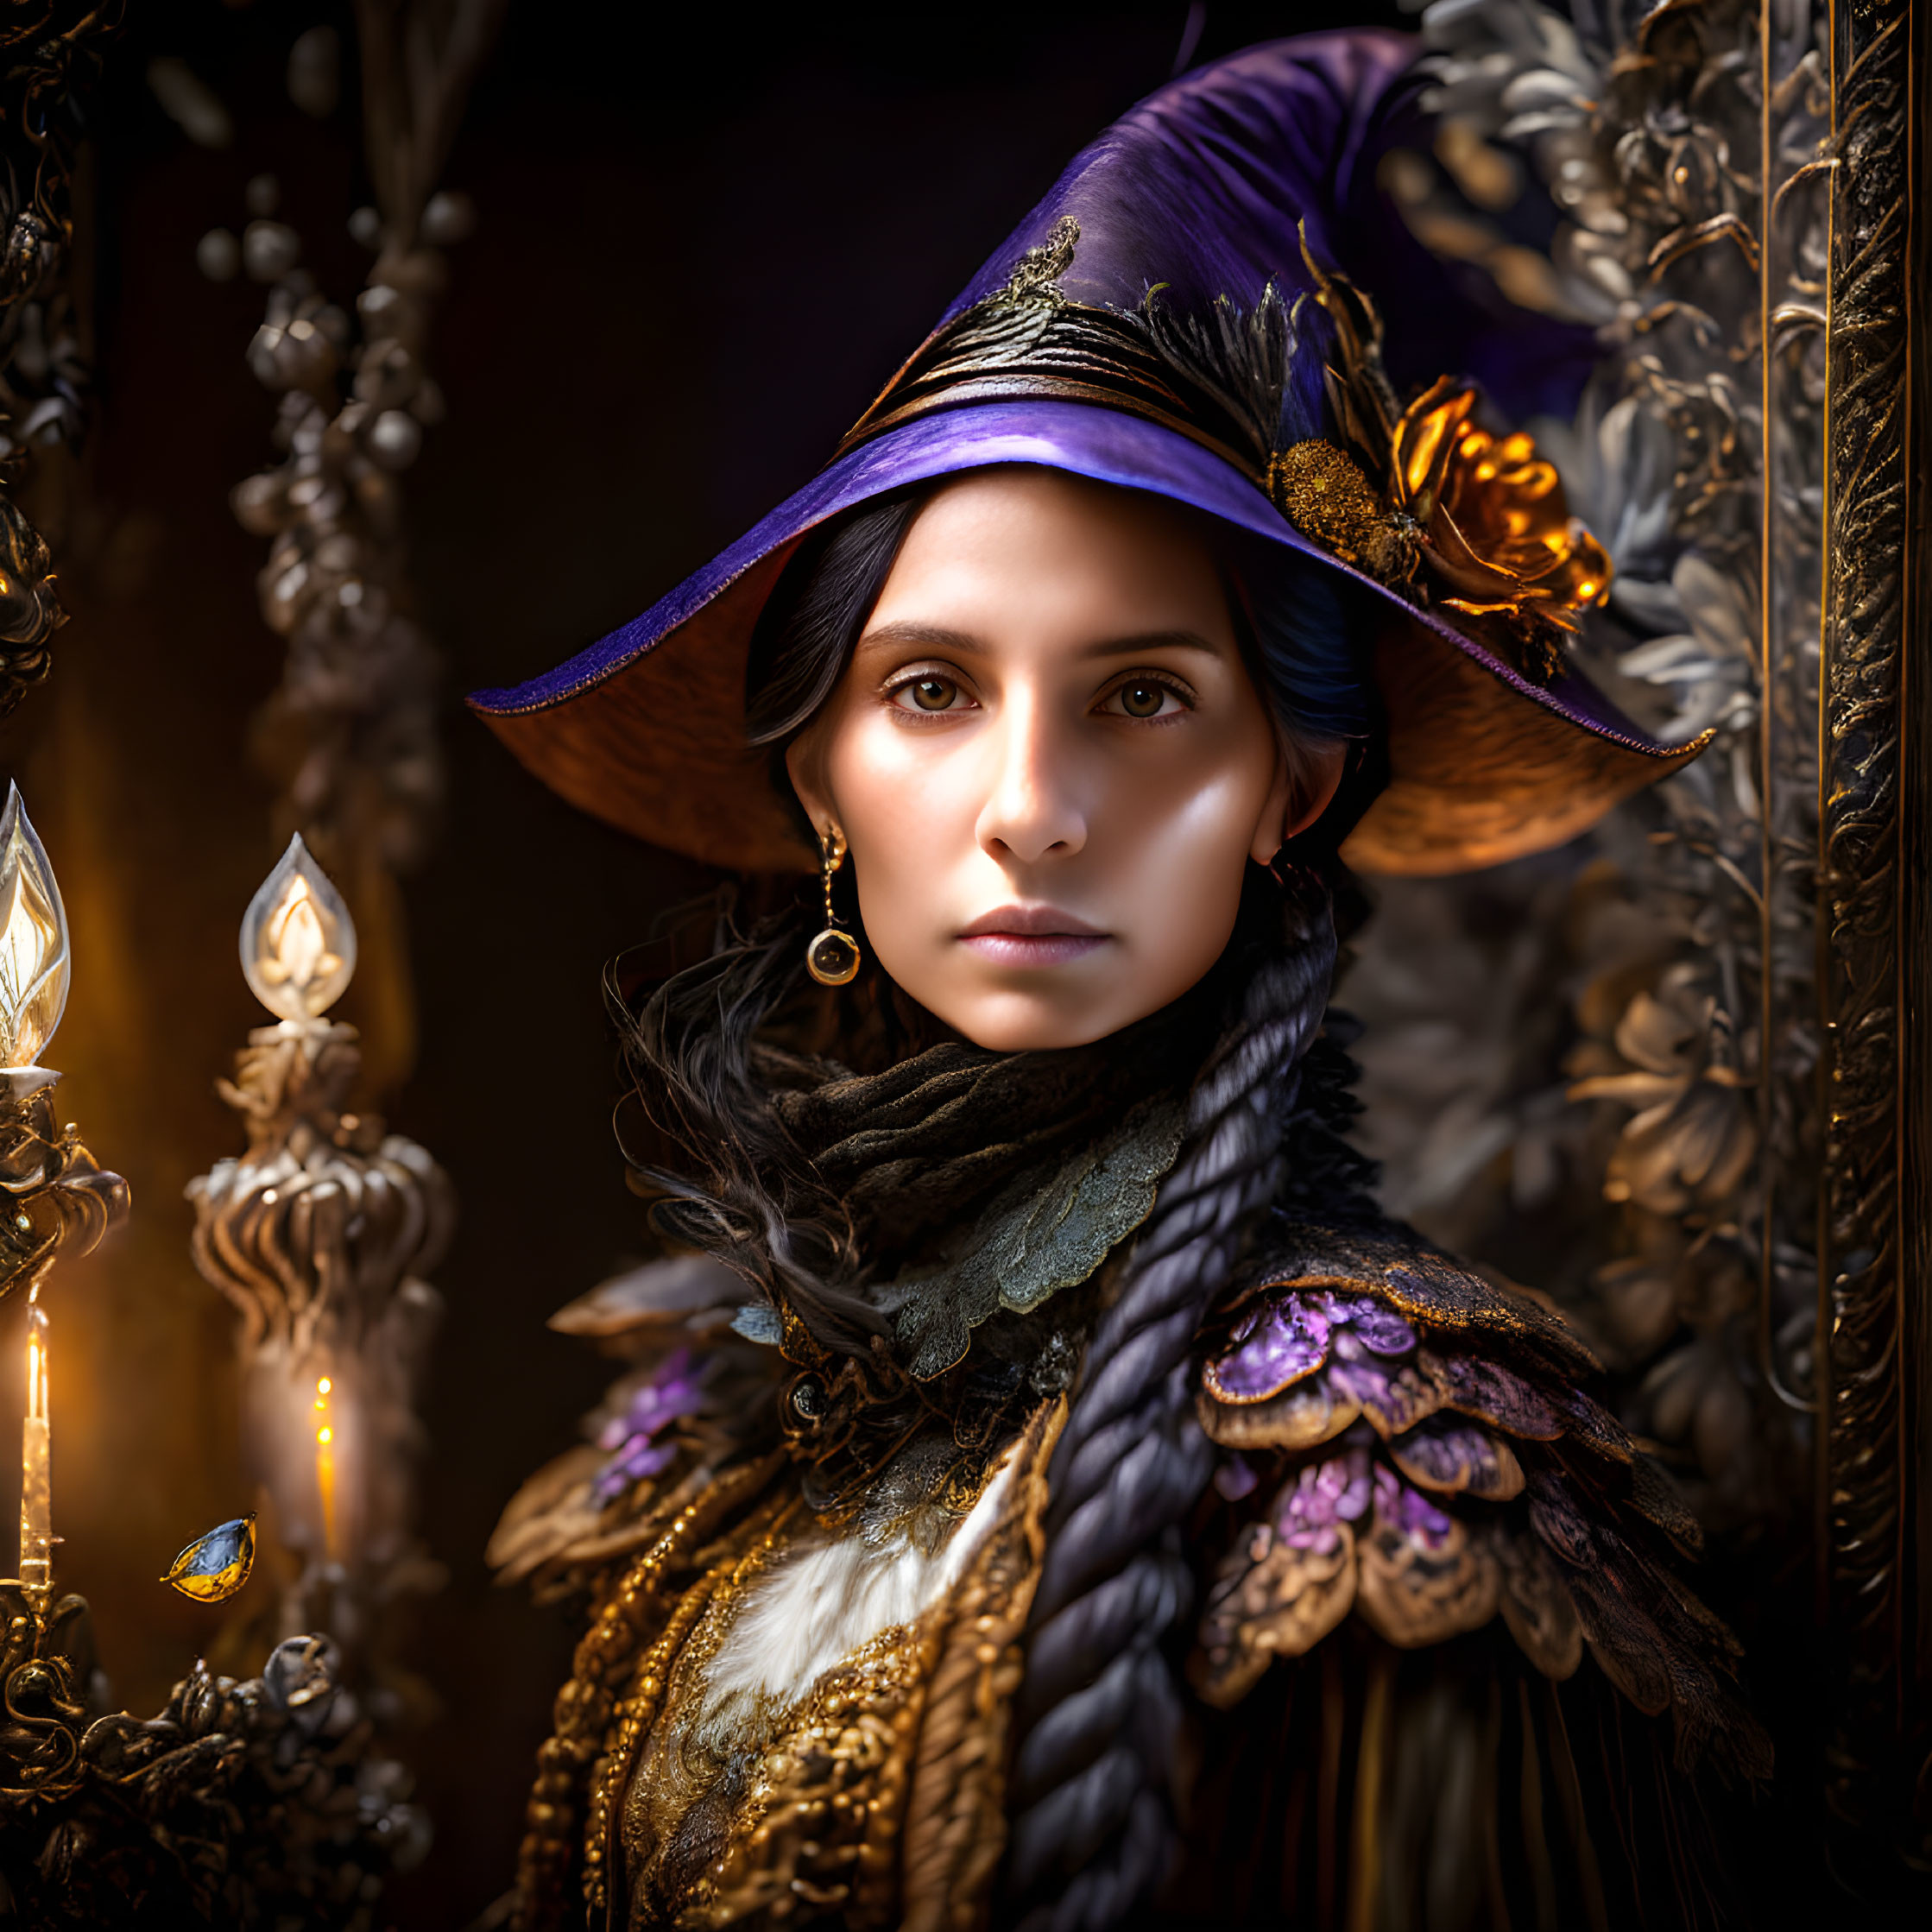 Woman in Plumed Purple Hat and Renaissance-Inspired Dress Surrounded by Candles